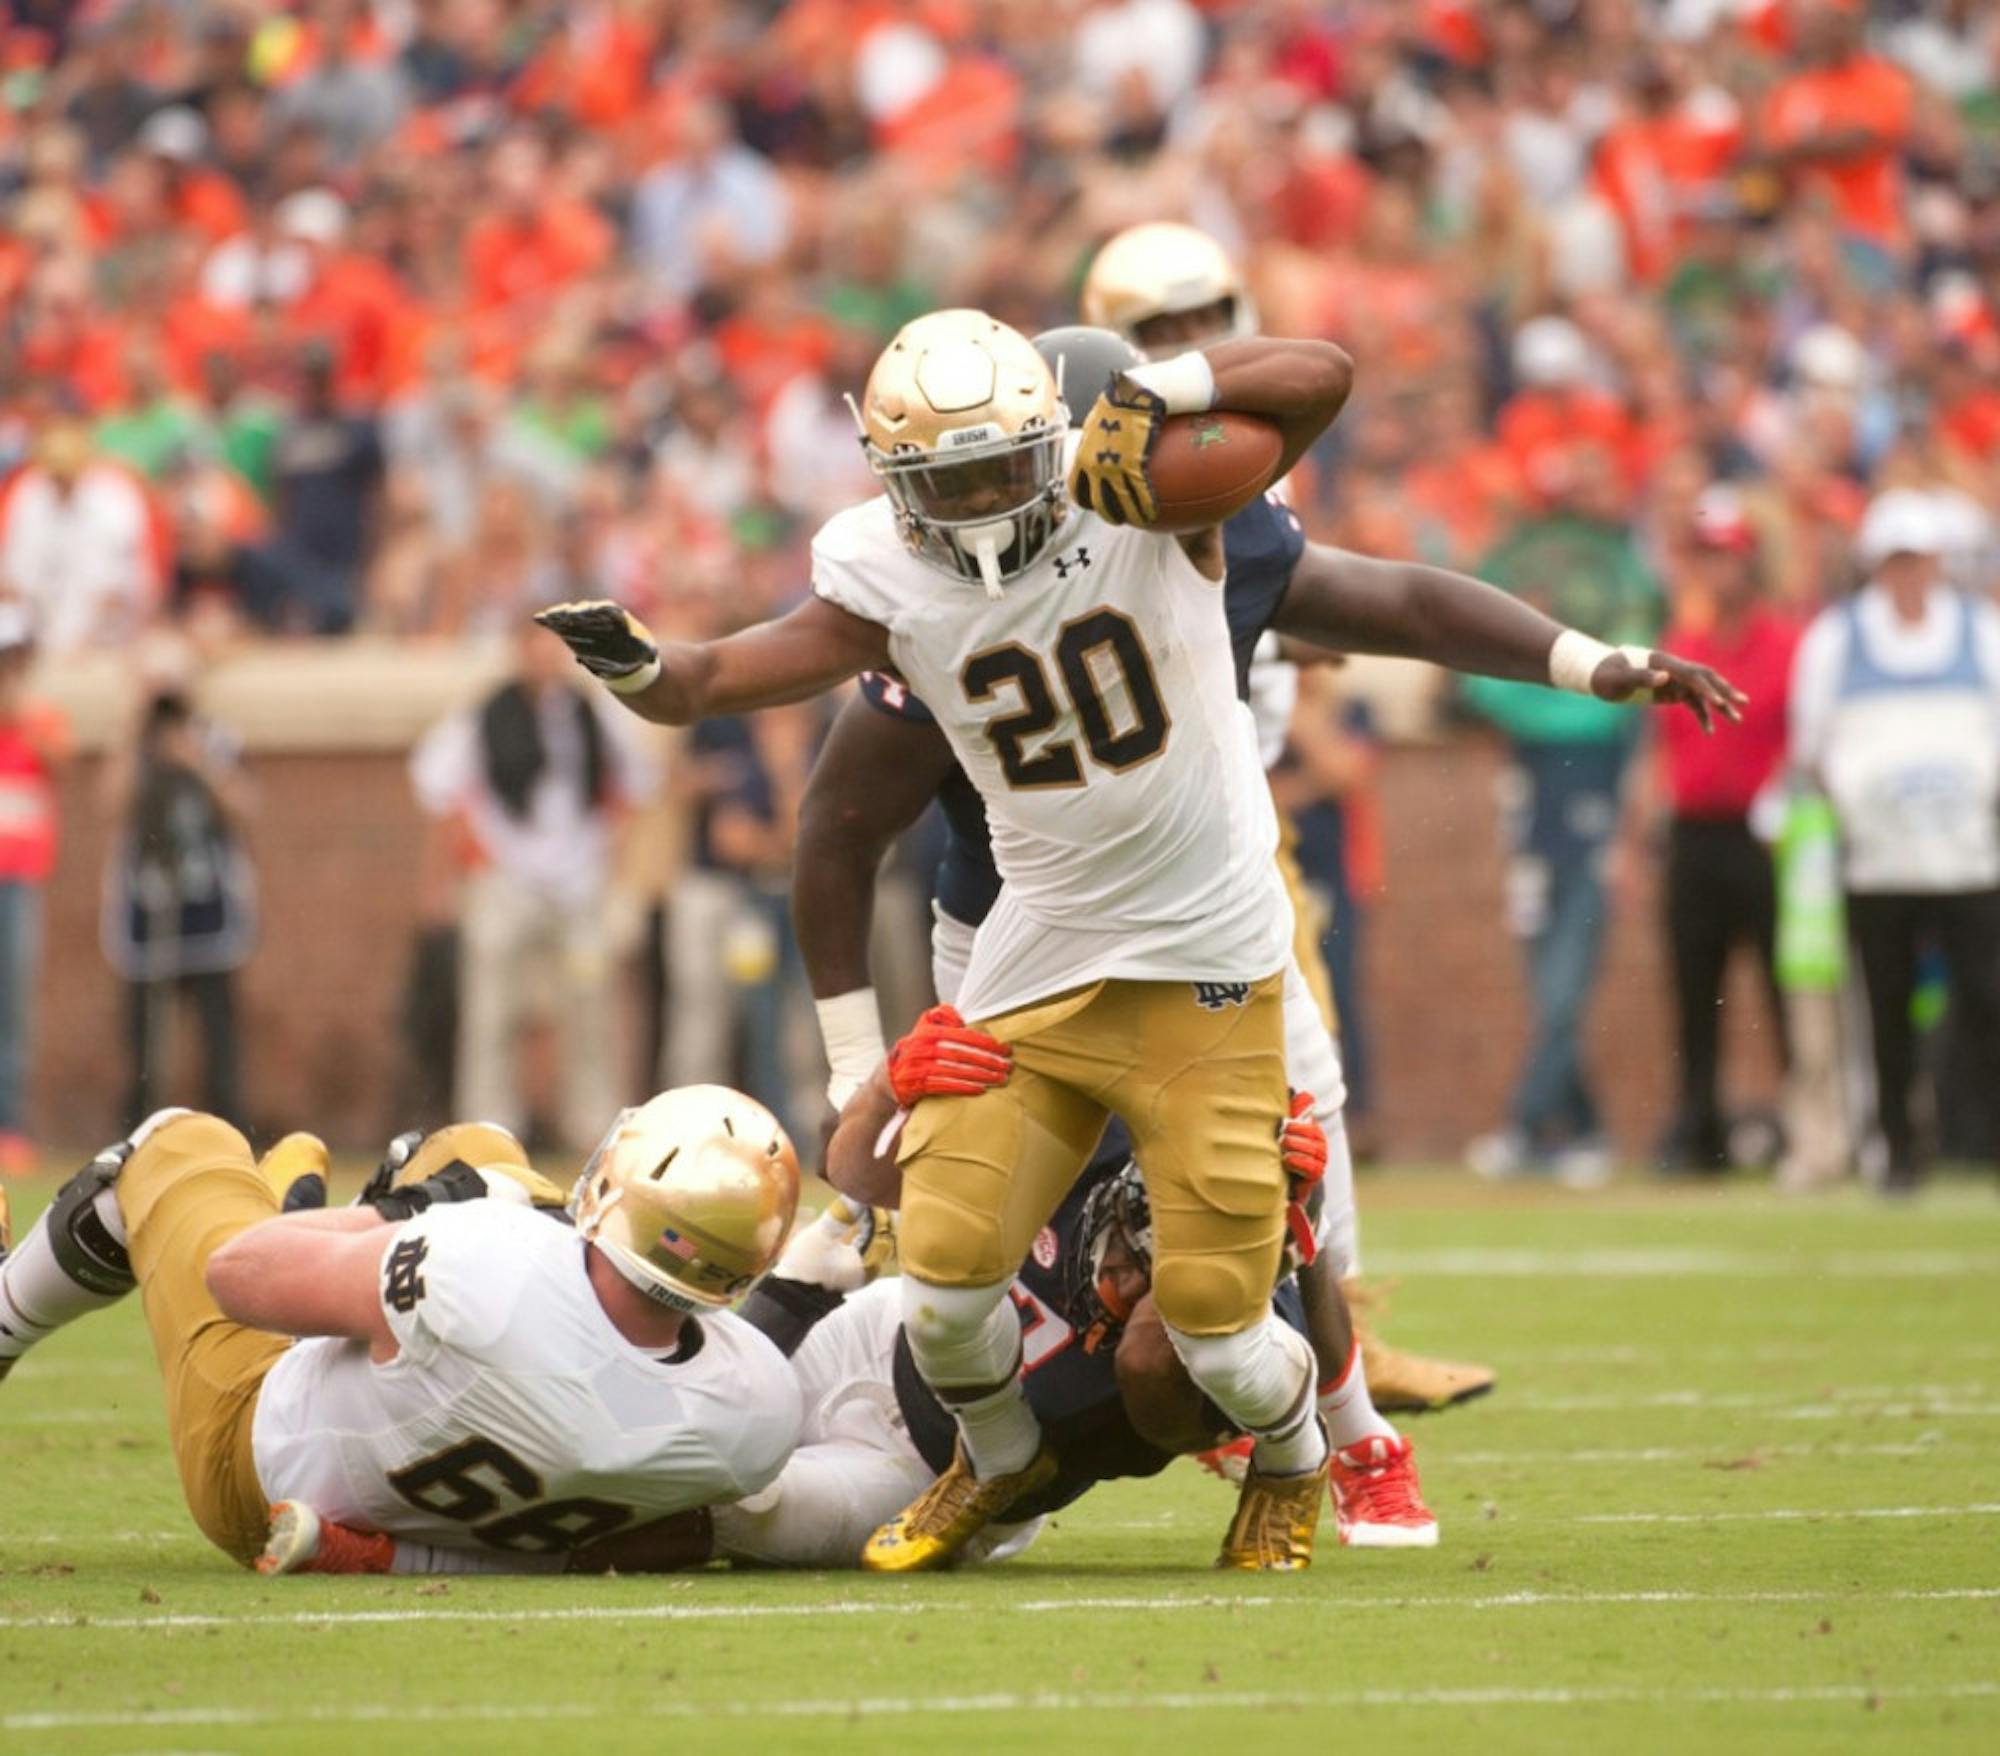 Former Irish running back C.J. Prosise breaks a tackle during Notre Dame's 34-27 win over Virginia on Sept. 12 in Charlottesville, Virginia. Prosise was the first Notre Dame running back drafted since Theo Riddick was picked in the sixth round of the 2013 NFL Draft on Friday.